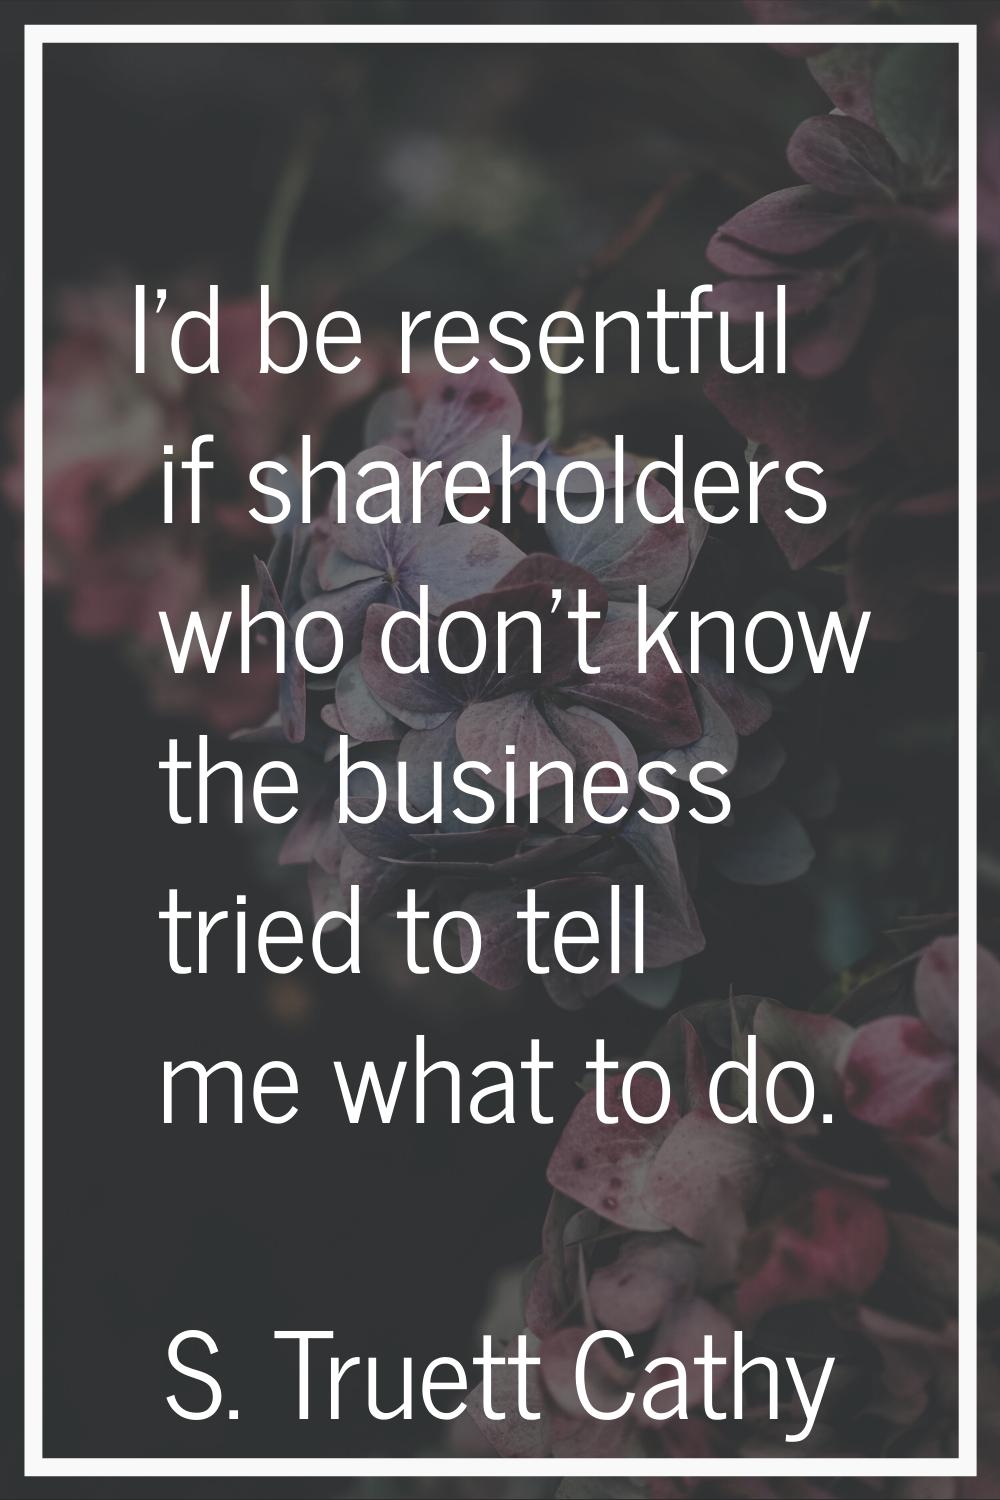 I'd be resentful if shareholders who don't know the business tried to tell me what to do.